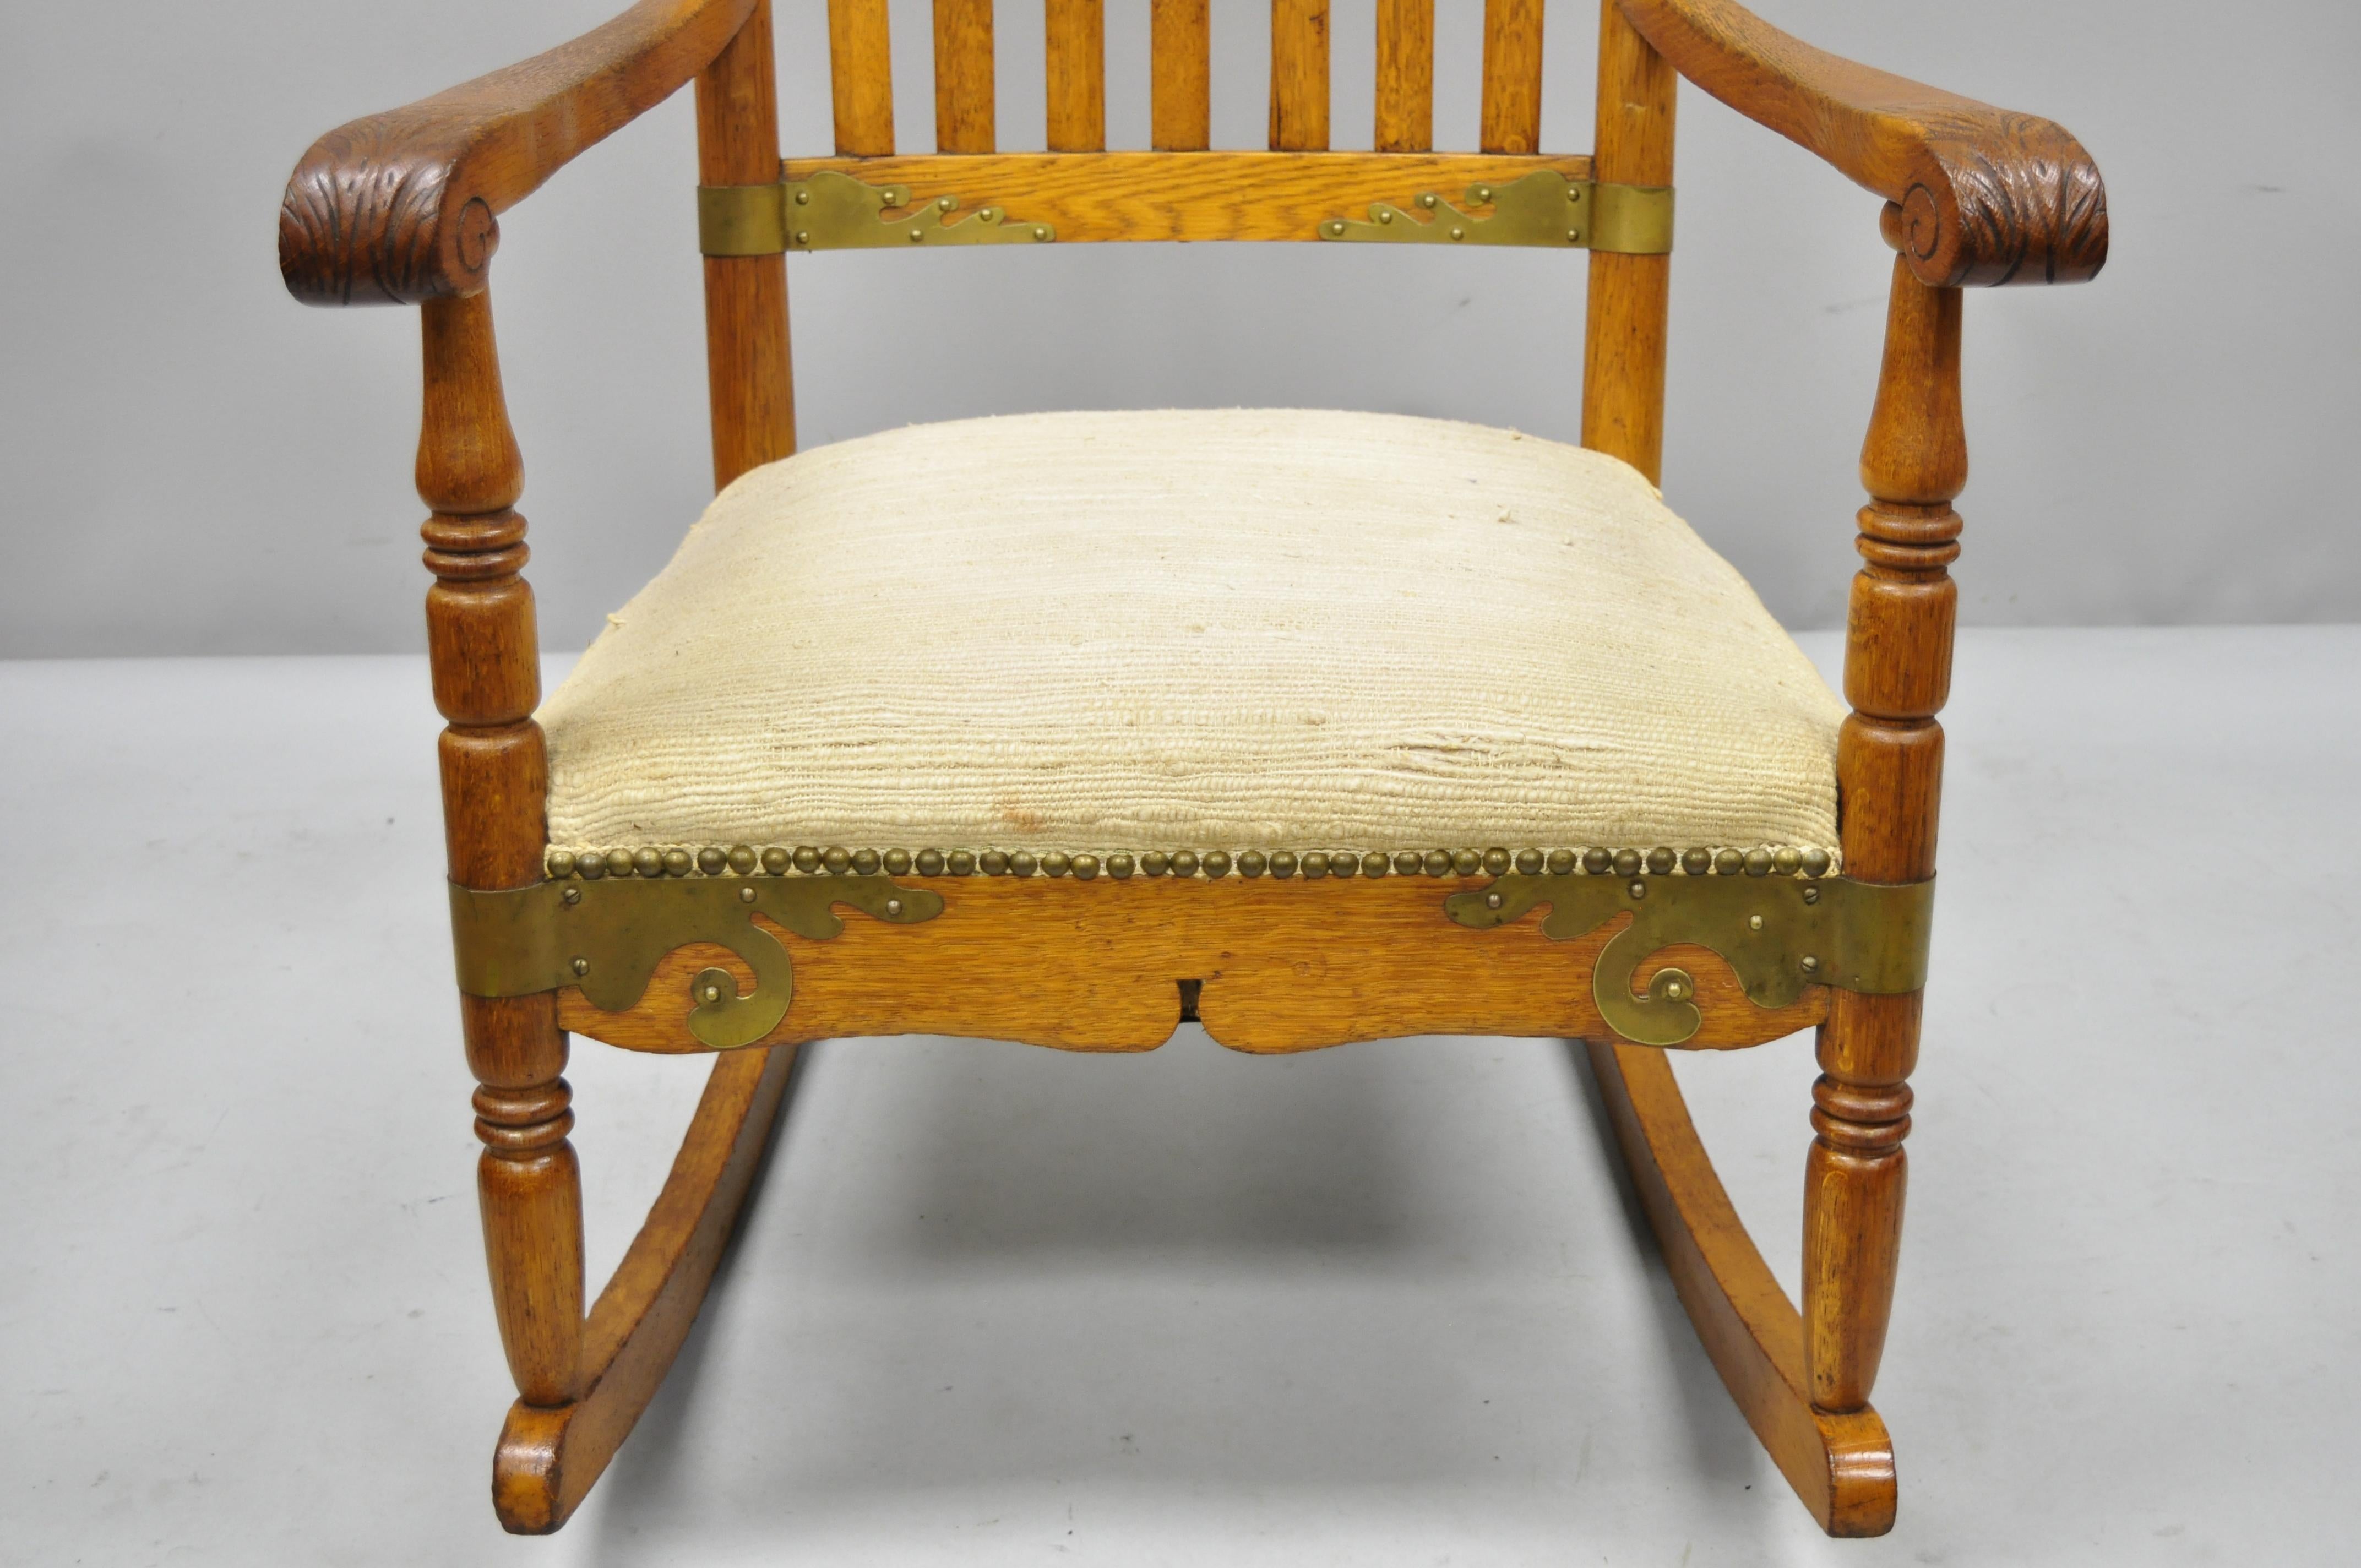 American Antique Victorian Oakwood Arts & Crafts Rocker Rocking Chair w/ Brass Accents For Sale